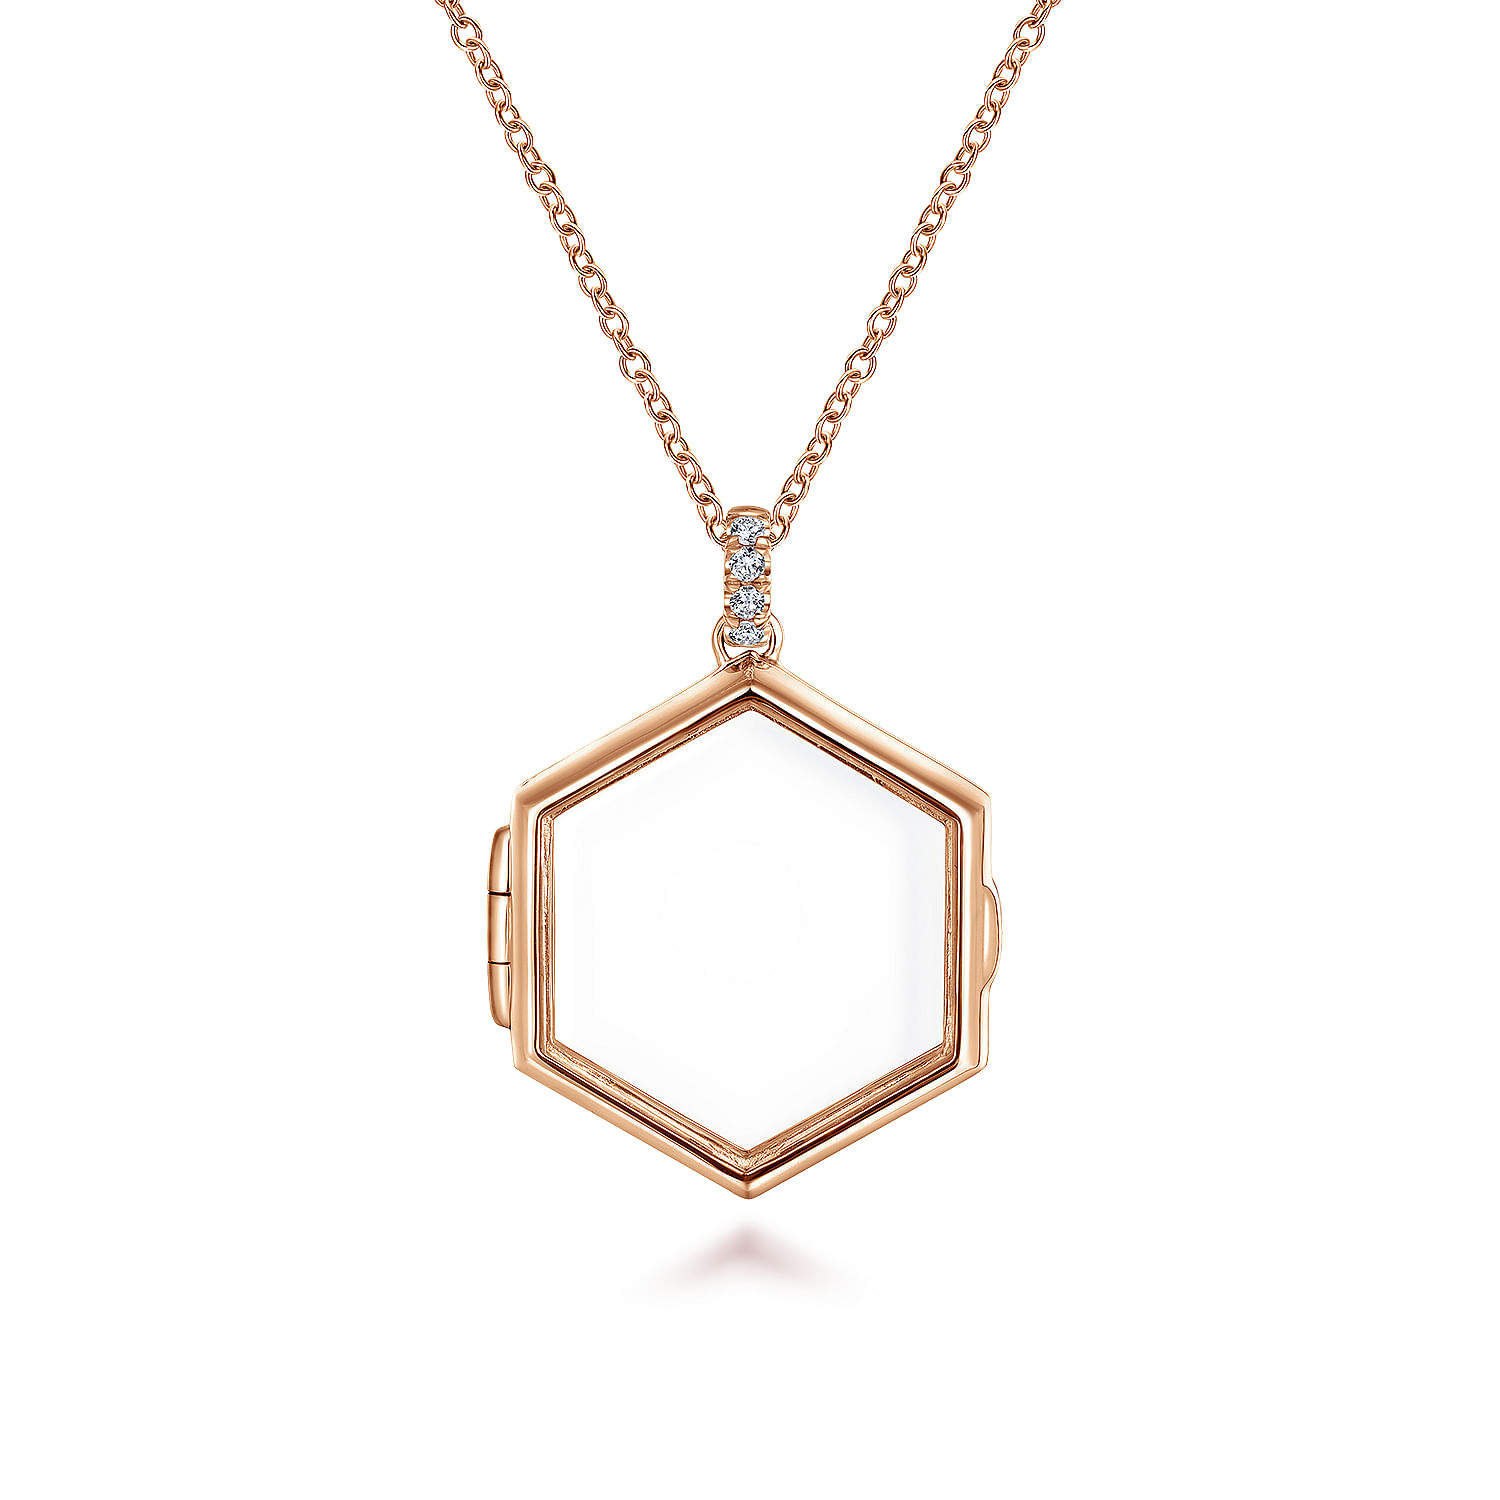 25 inch 14K Rose Gold Hexagonal Glass Front Locket Necklace